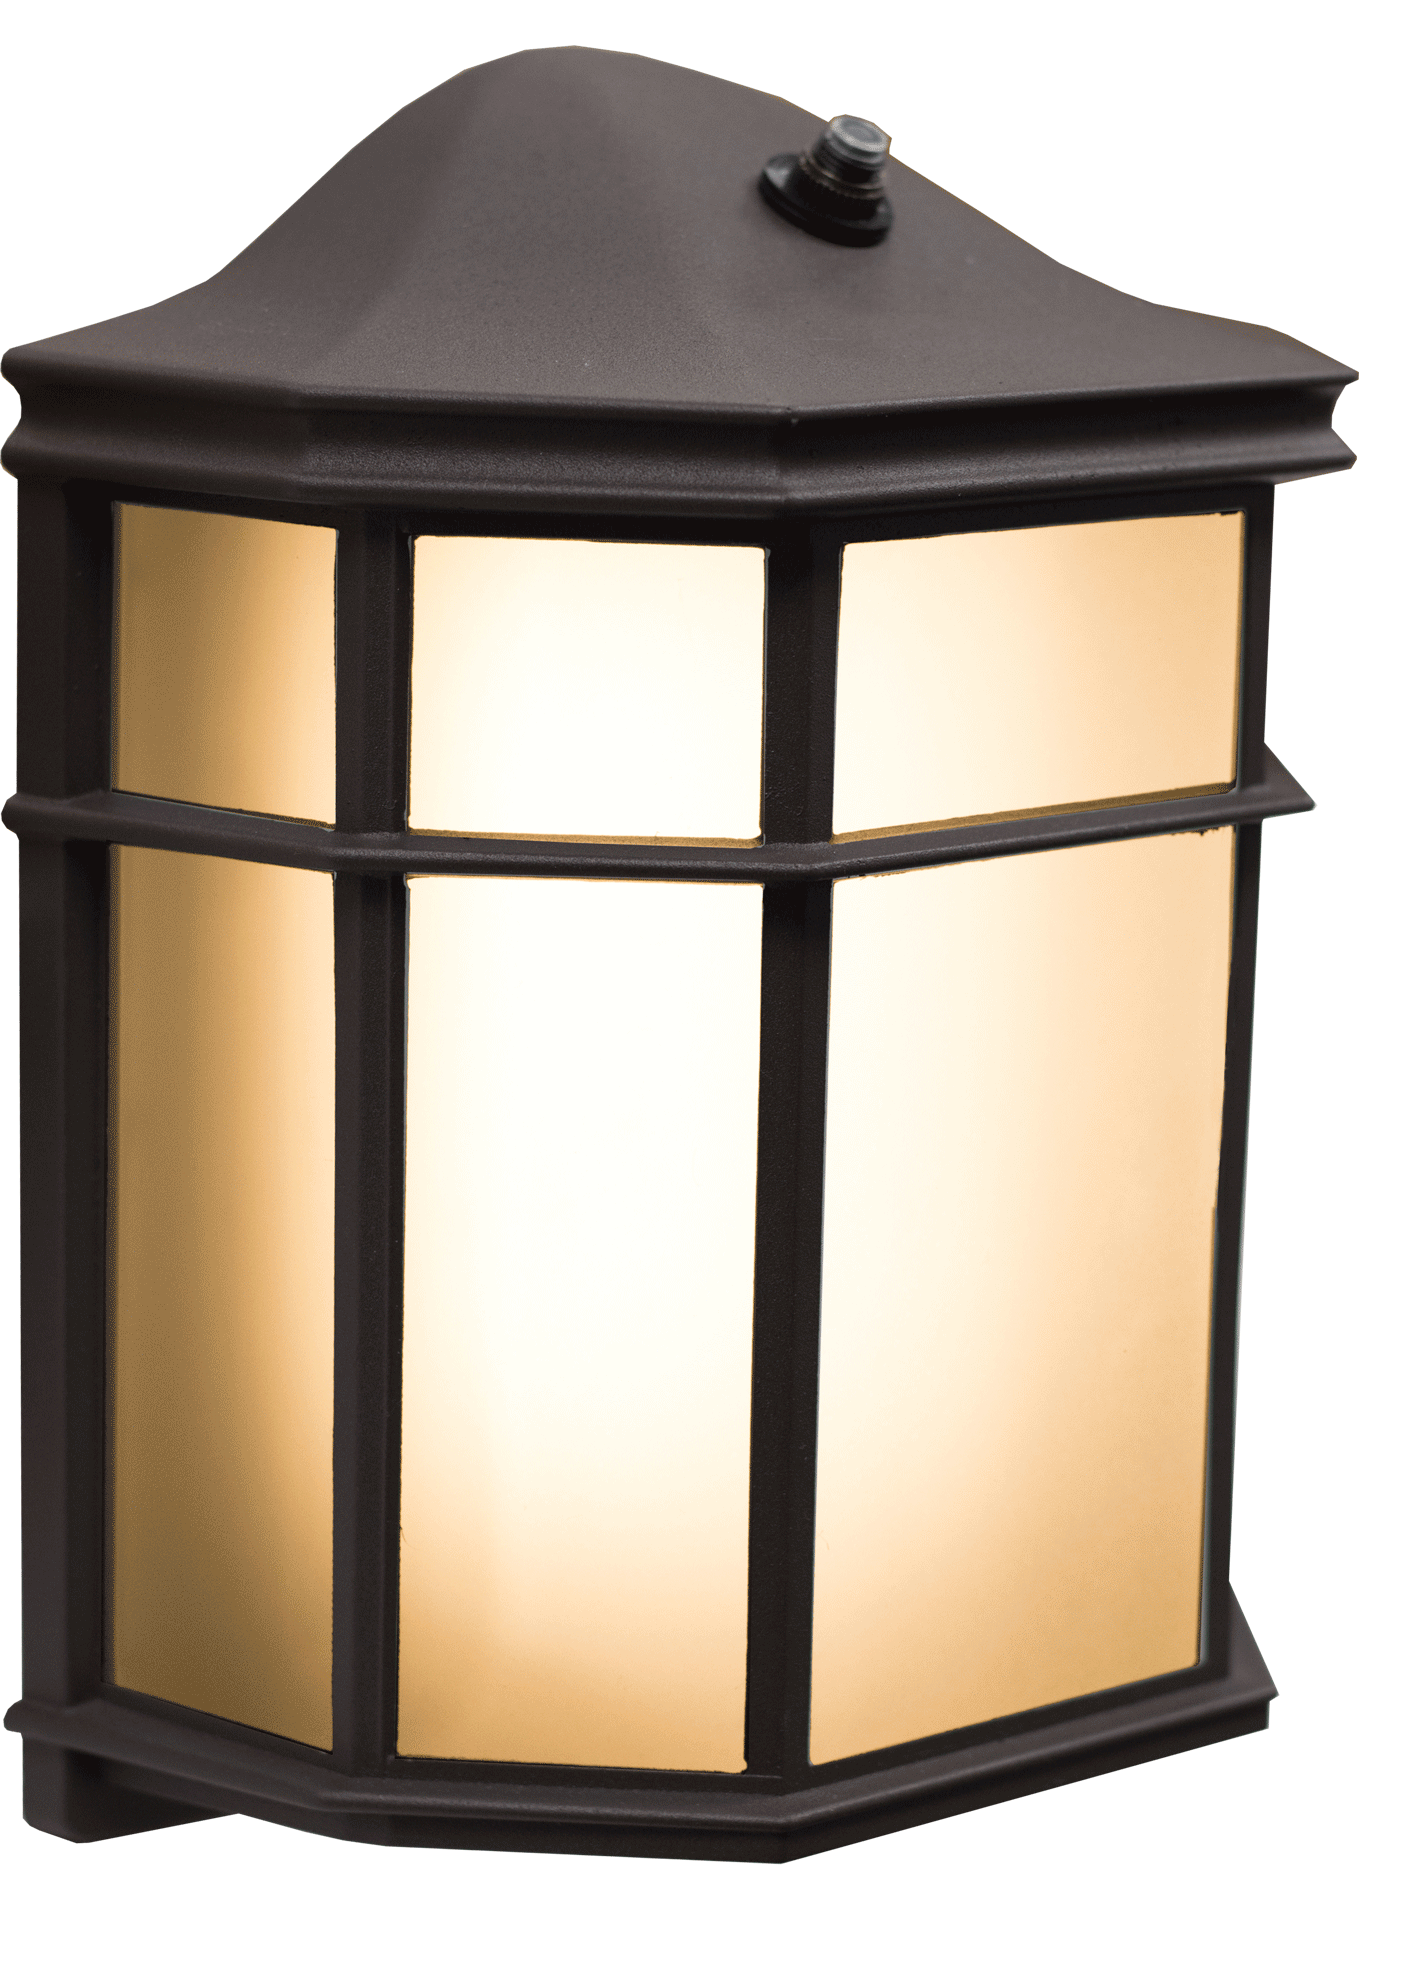 Westgate LRS-A-30K-PC LED Residential Lanterns with Photocell